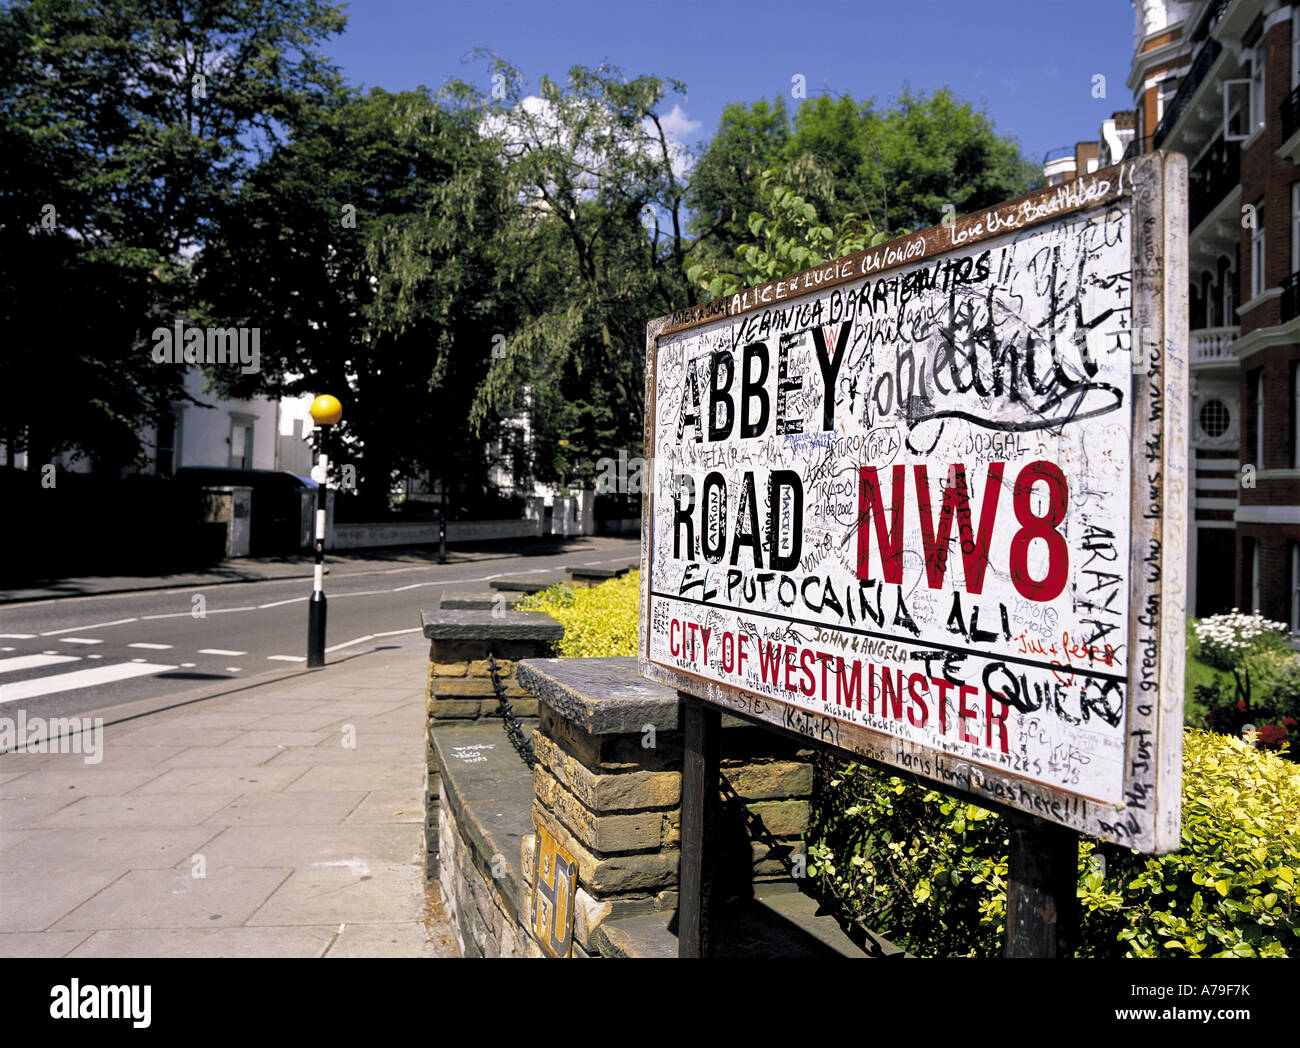 The Beatles Abbey Road London England Banque D'Images